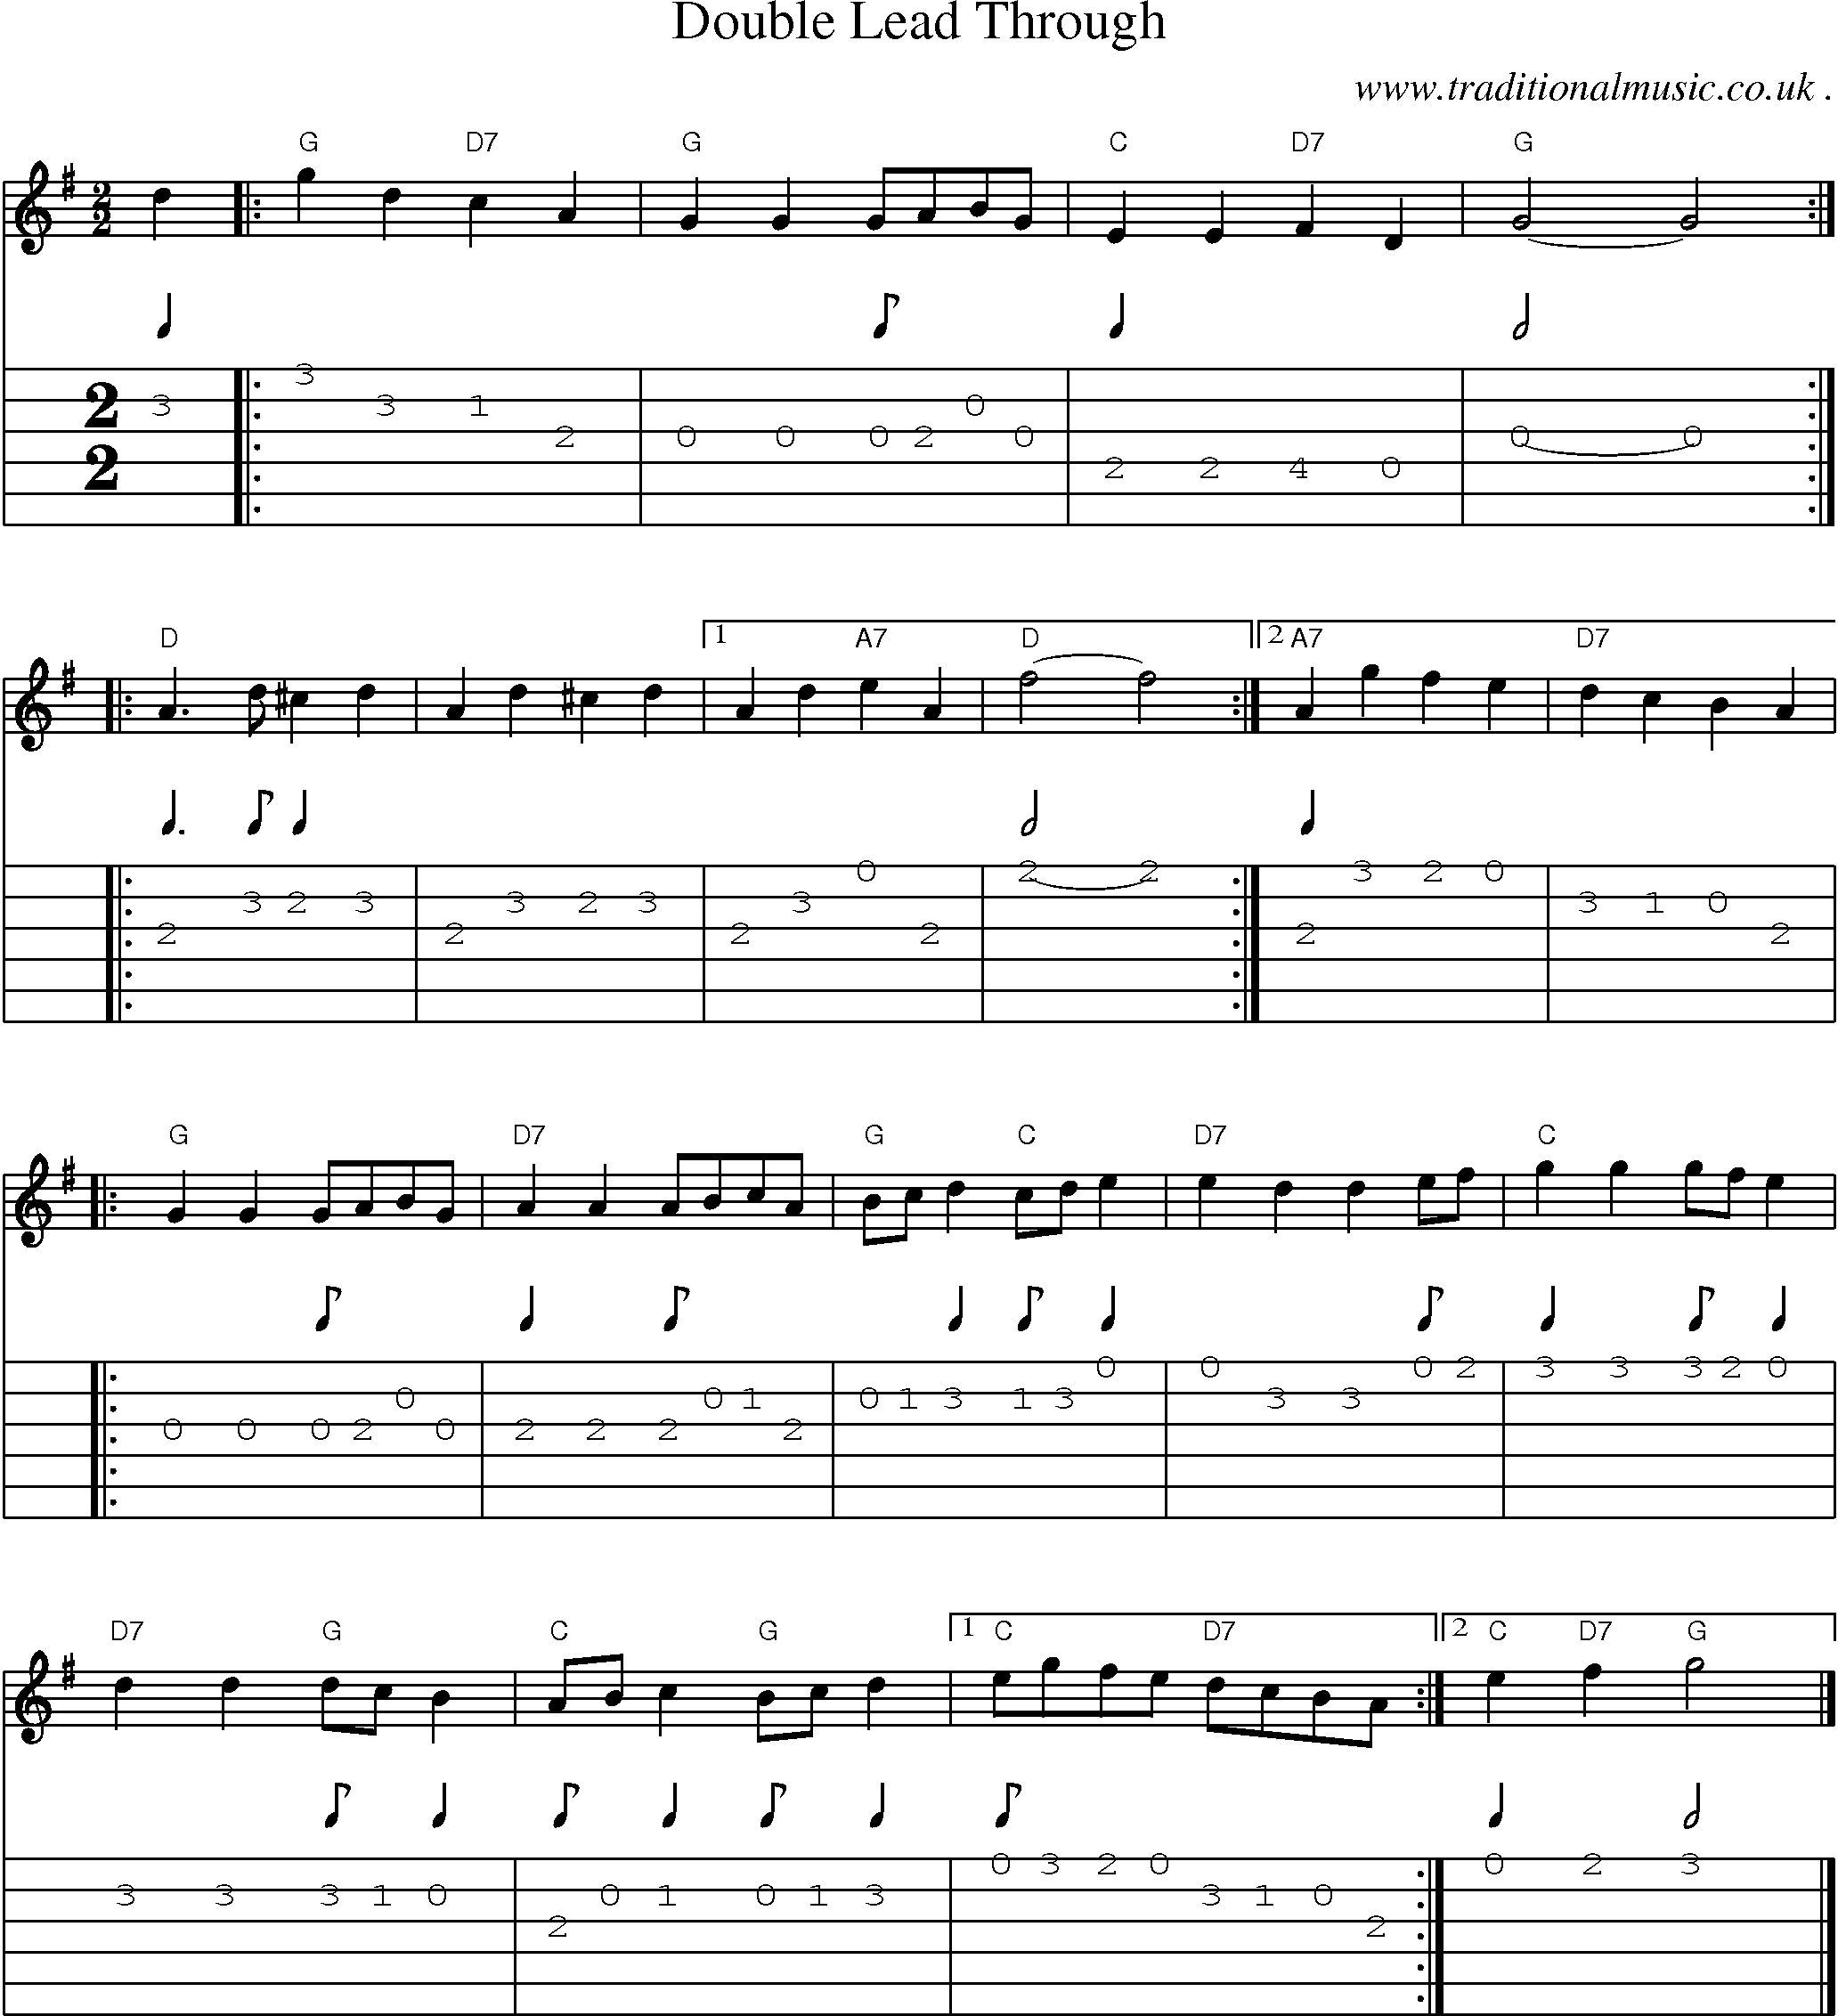 Music Score and Guitar Tabs for Double Lead Through